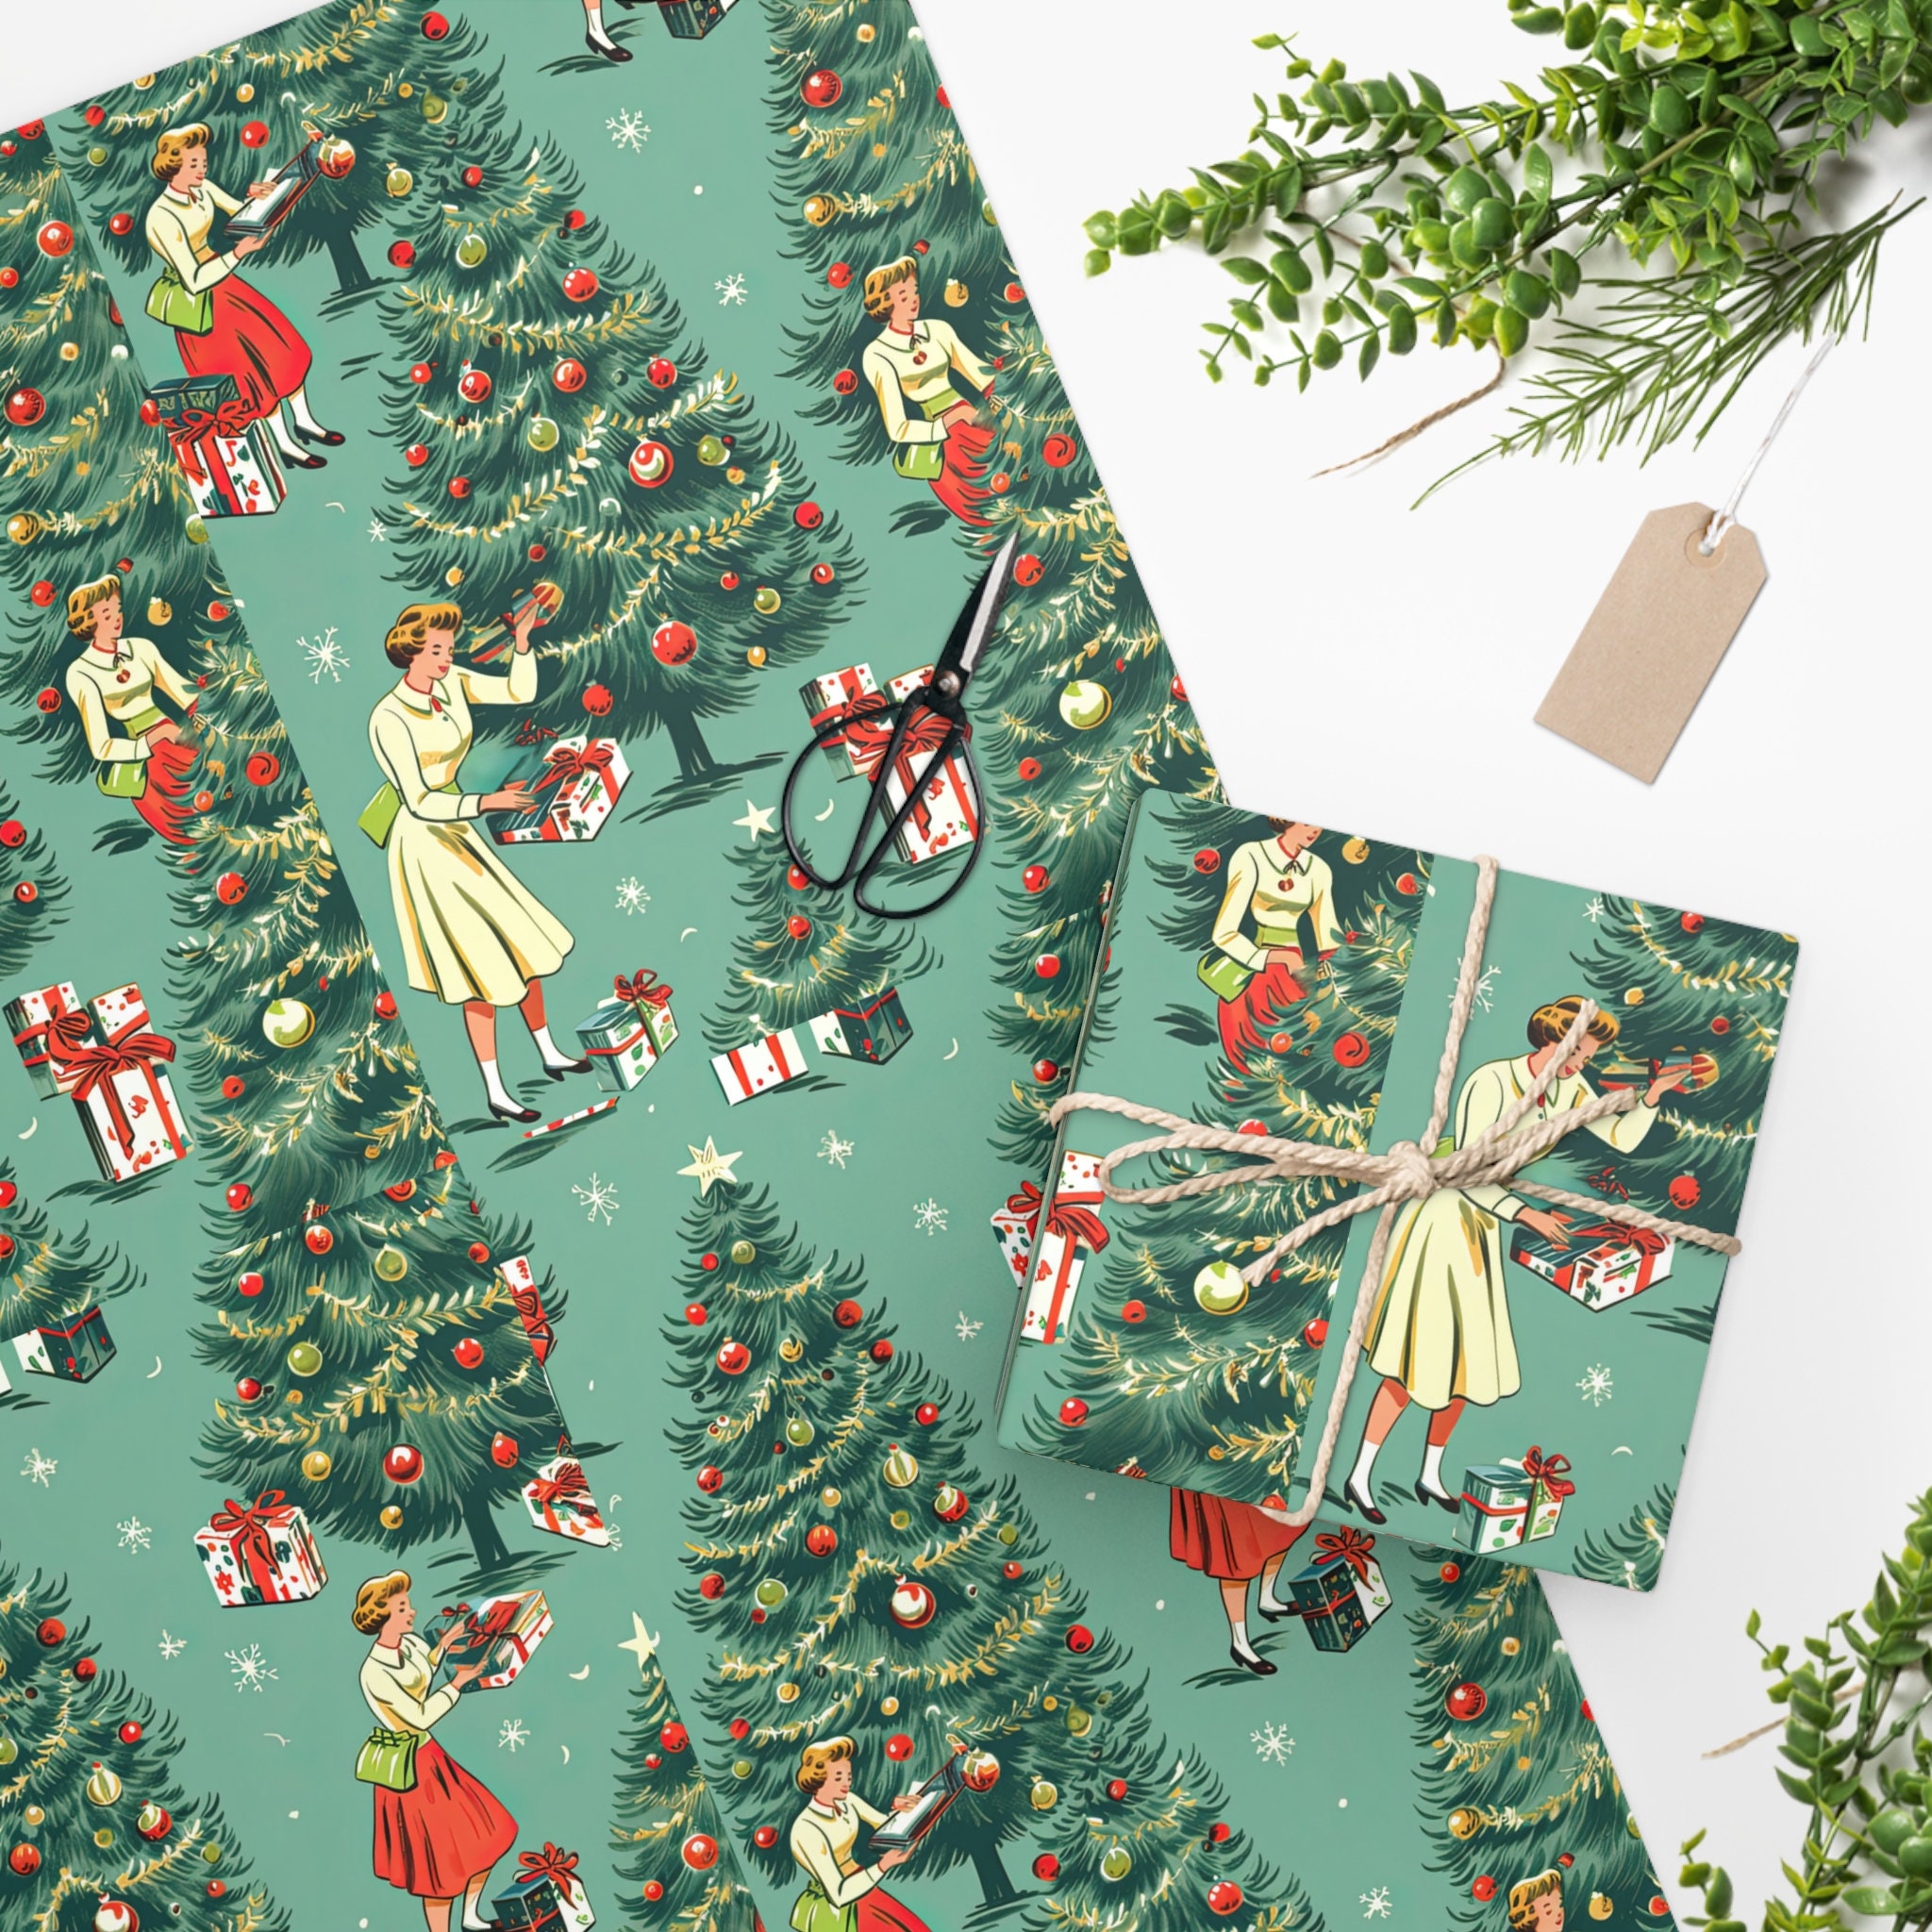 1950s Retro Vintage Christmas Wrapping Paper, Mid Century Modern Retro  Green, Red, Women, Ladies, Housewives Holiday Gift Wrap